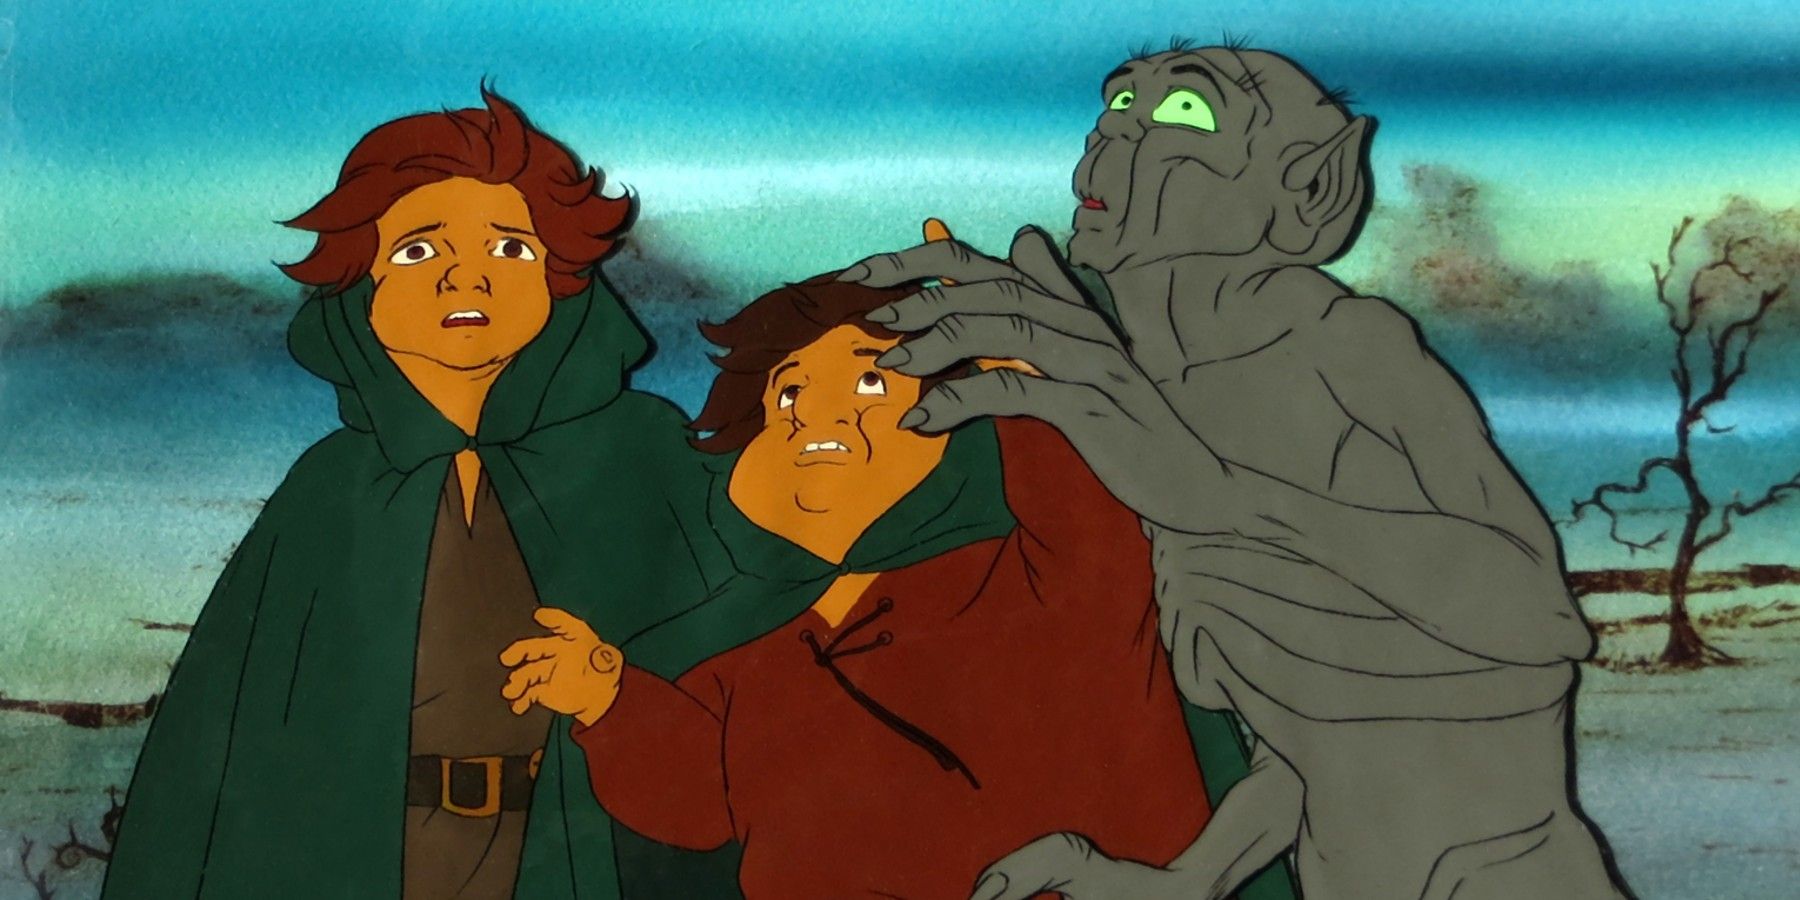 Gollum, Frodo, &amp; Sam from Ralph Bakshi's animated Lord of the Rings film (1978).